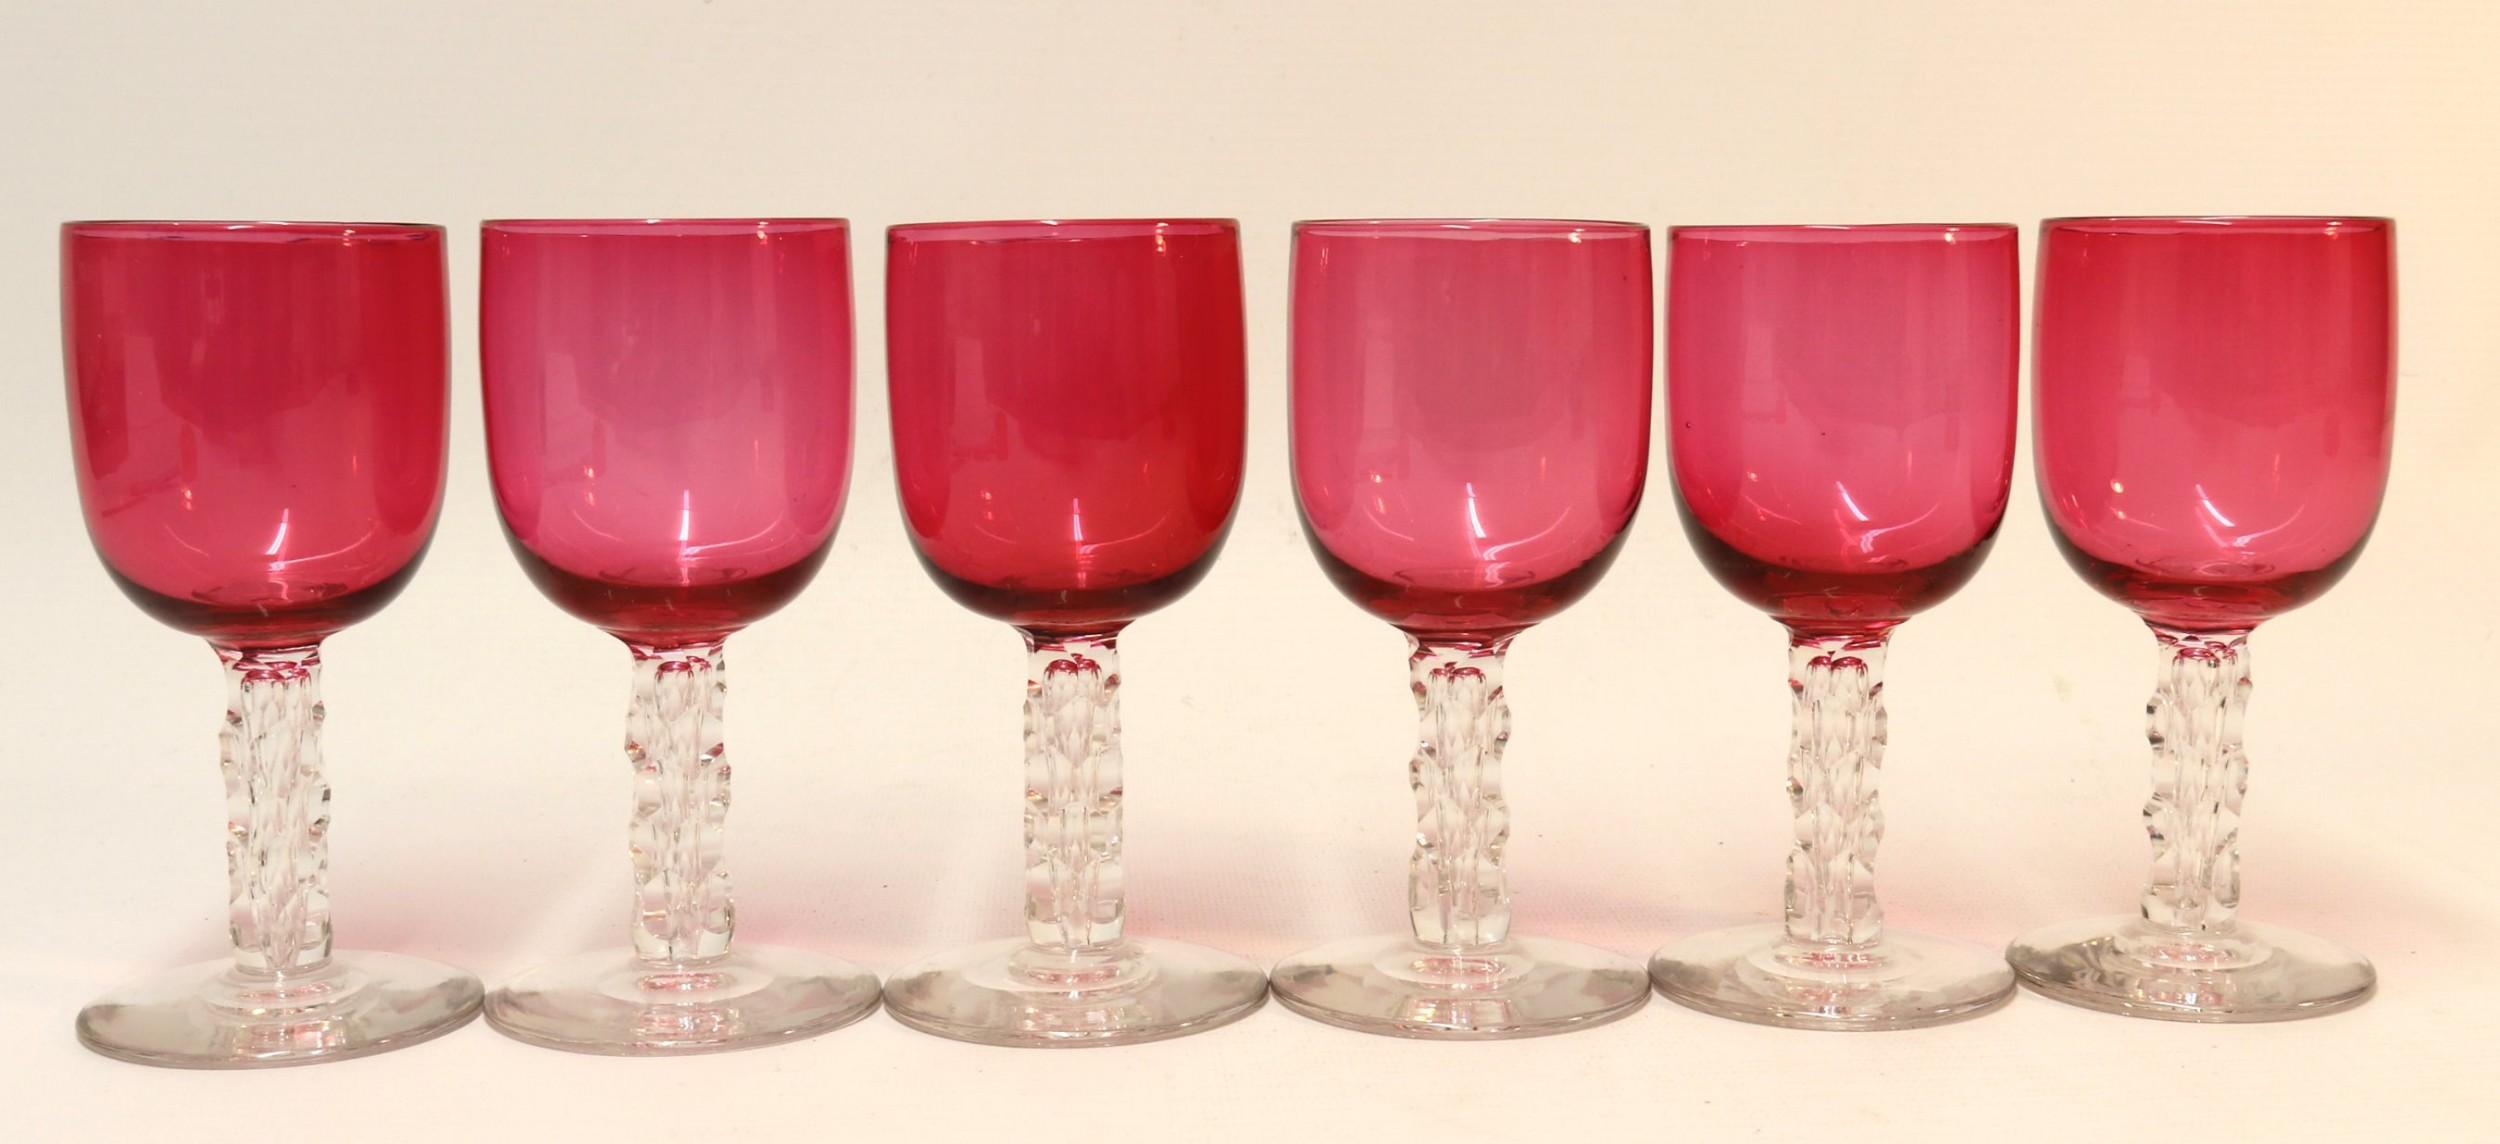 A set of six elegant Victorian goblets with ruby glass bowls on clear cut glass stems and foot.
These goblets are in perfect condition.